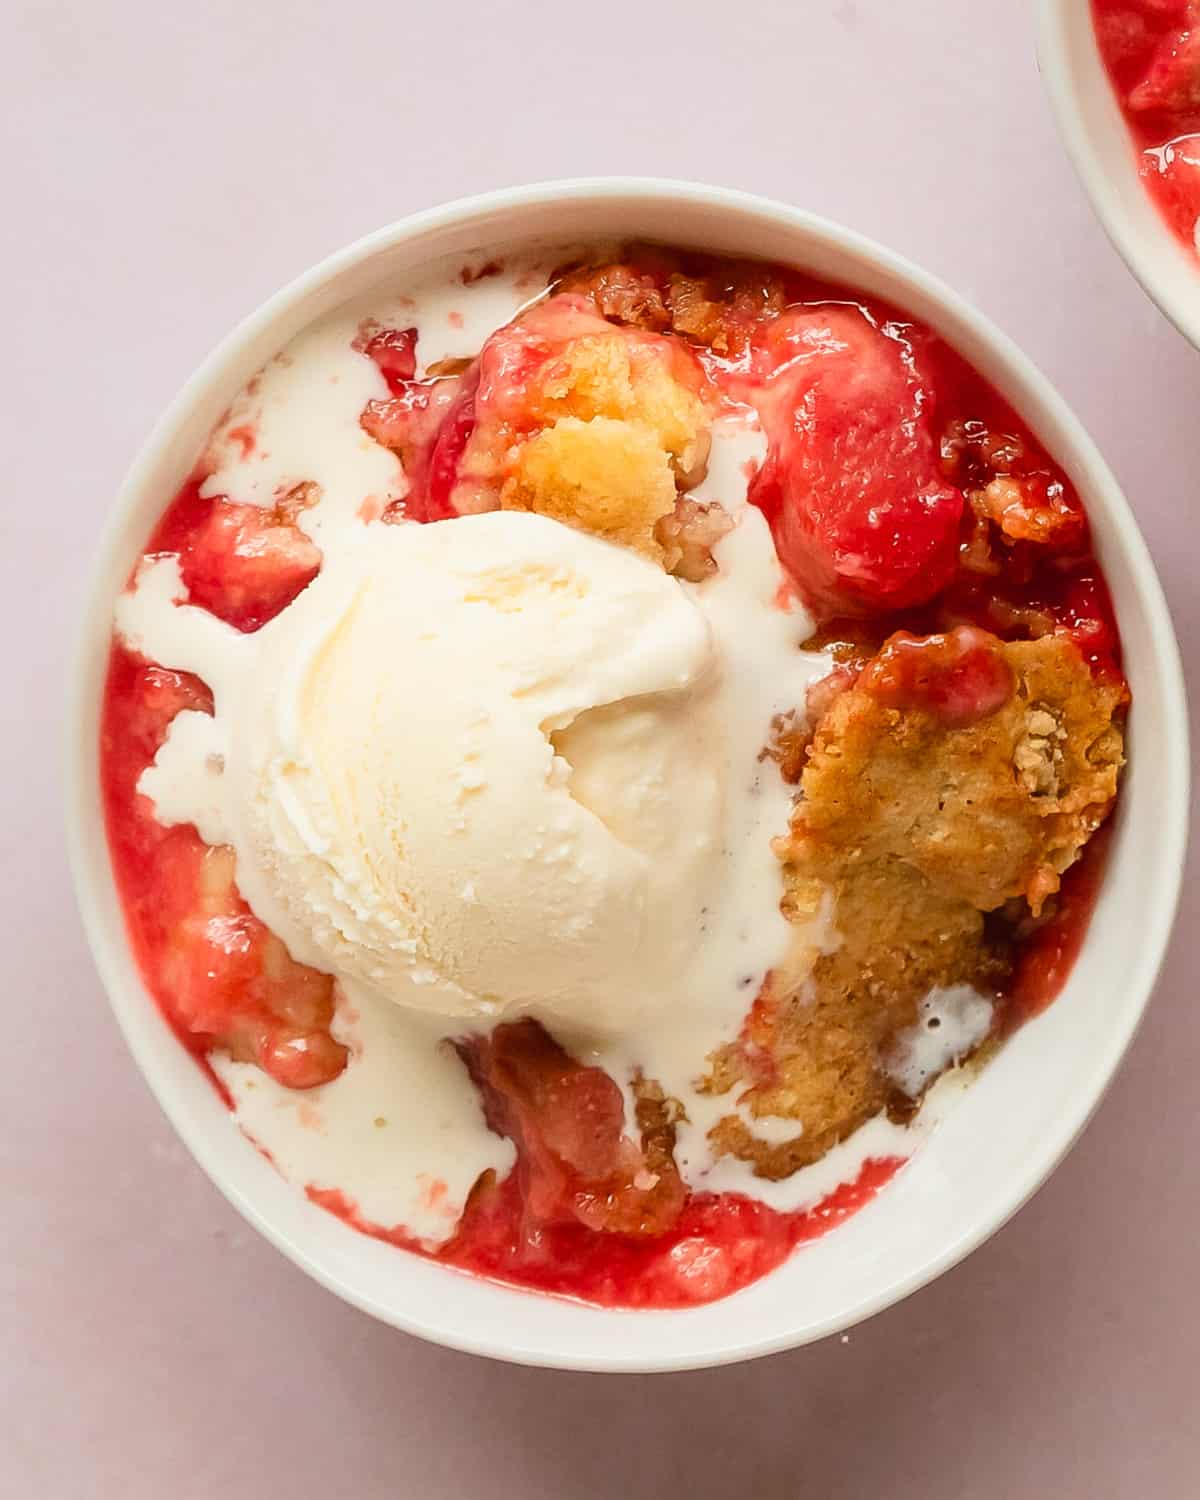 Rhubarb dump cake is a refreshingly delicious baked fruit dessert made from tart rhubarb, sweet strawberry jello, white or yellow cake mix and butter. Make this rhubarb cake mix cobbler for the perfect quick and easy spring or summer dessert.